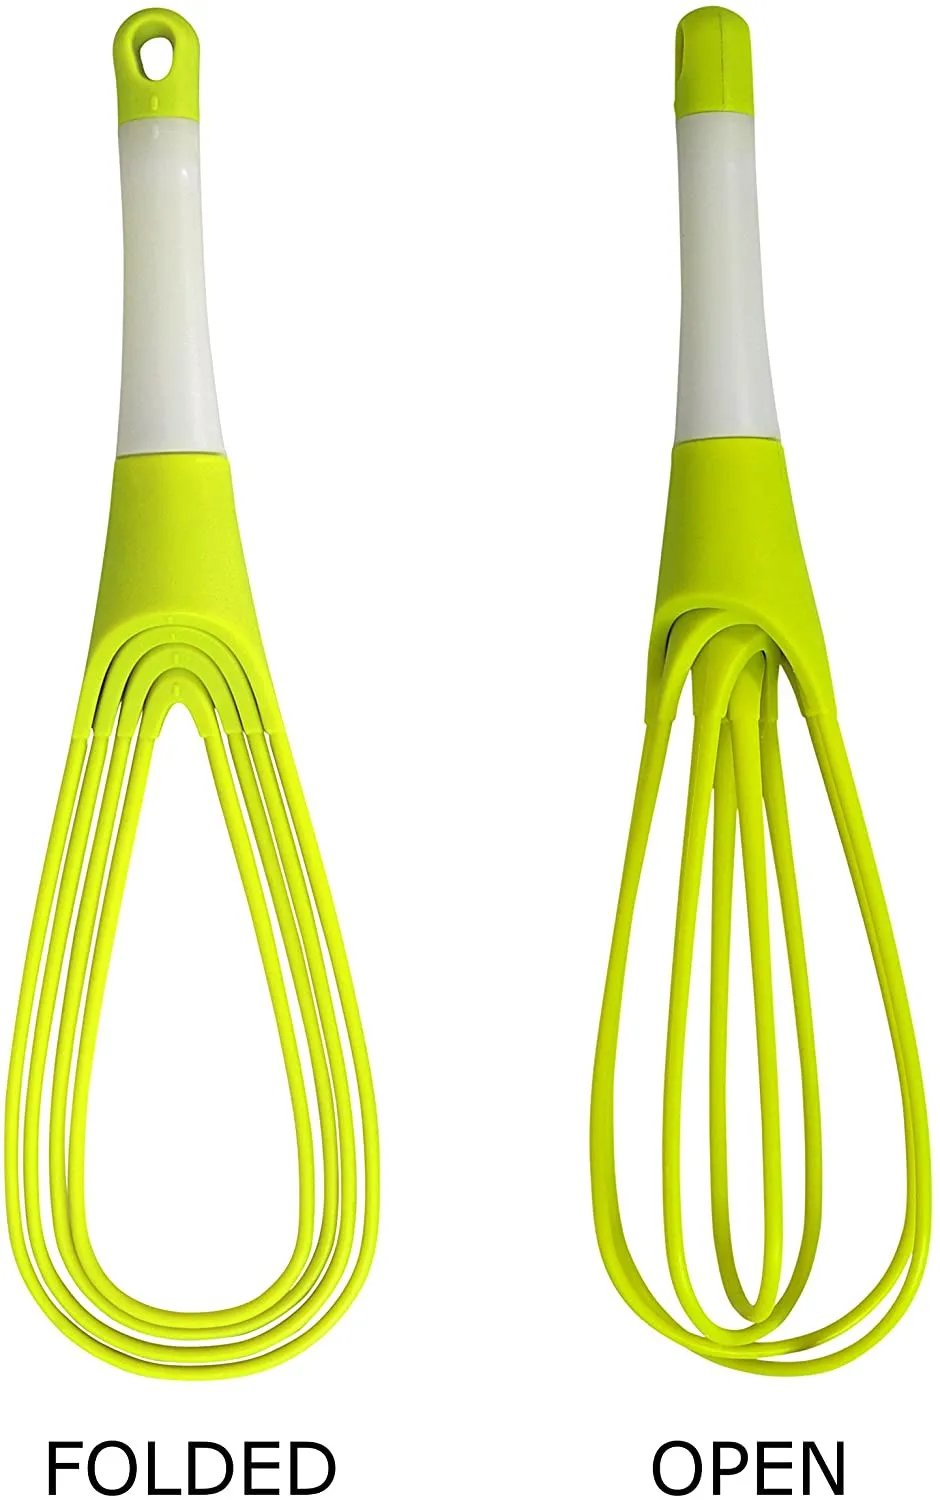 Flat and Balloon Collapsible Twist Whisk Egg Beater Silicone Rotating Silicone Whisks for Cooking